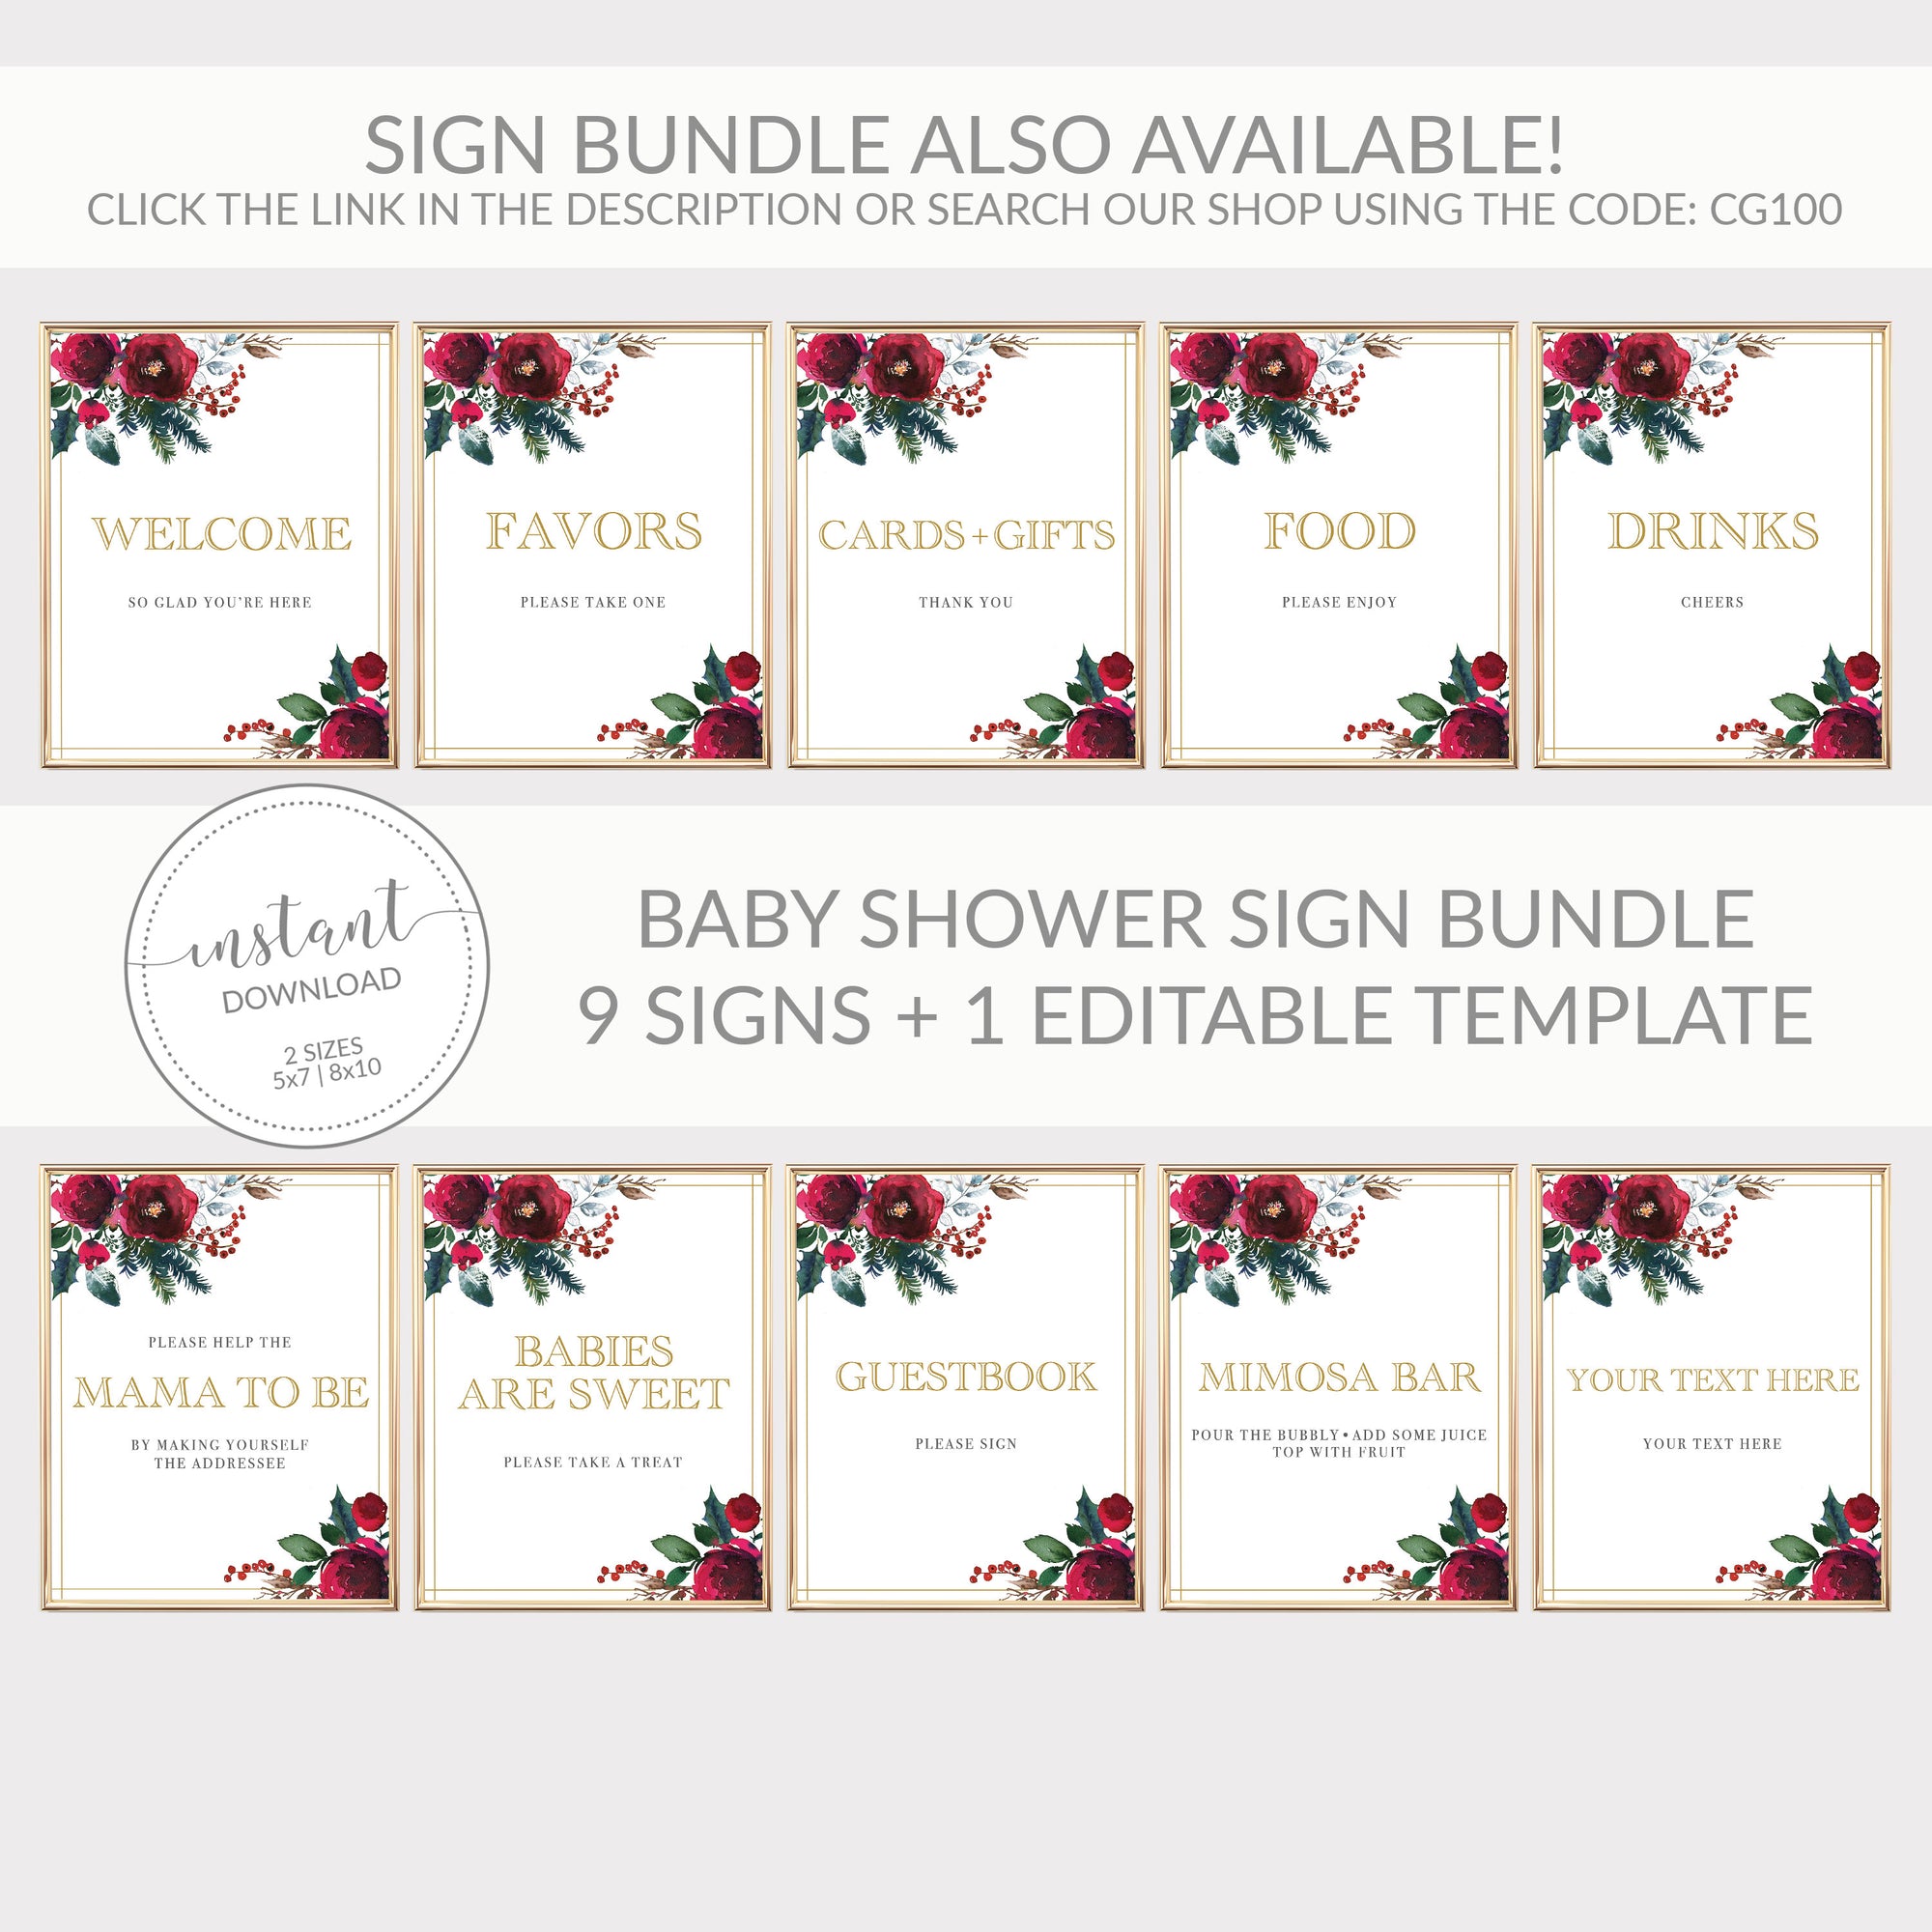 Babies Are Sweet baby shower Favors sign printable | Floral theme